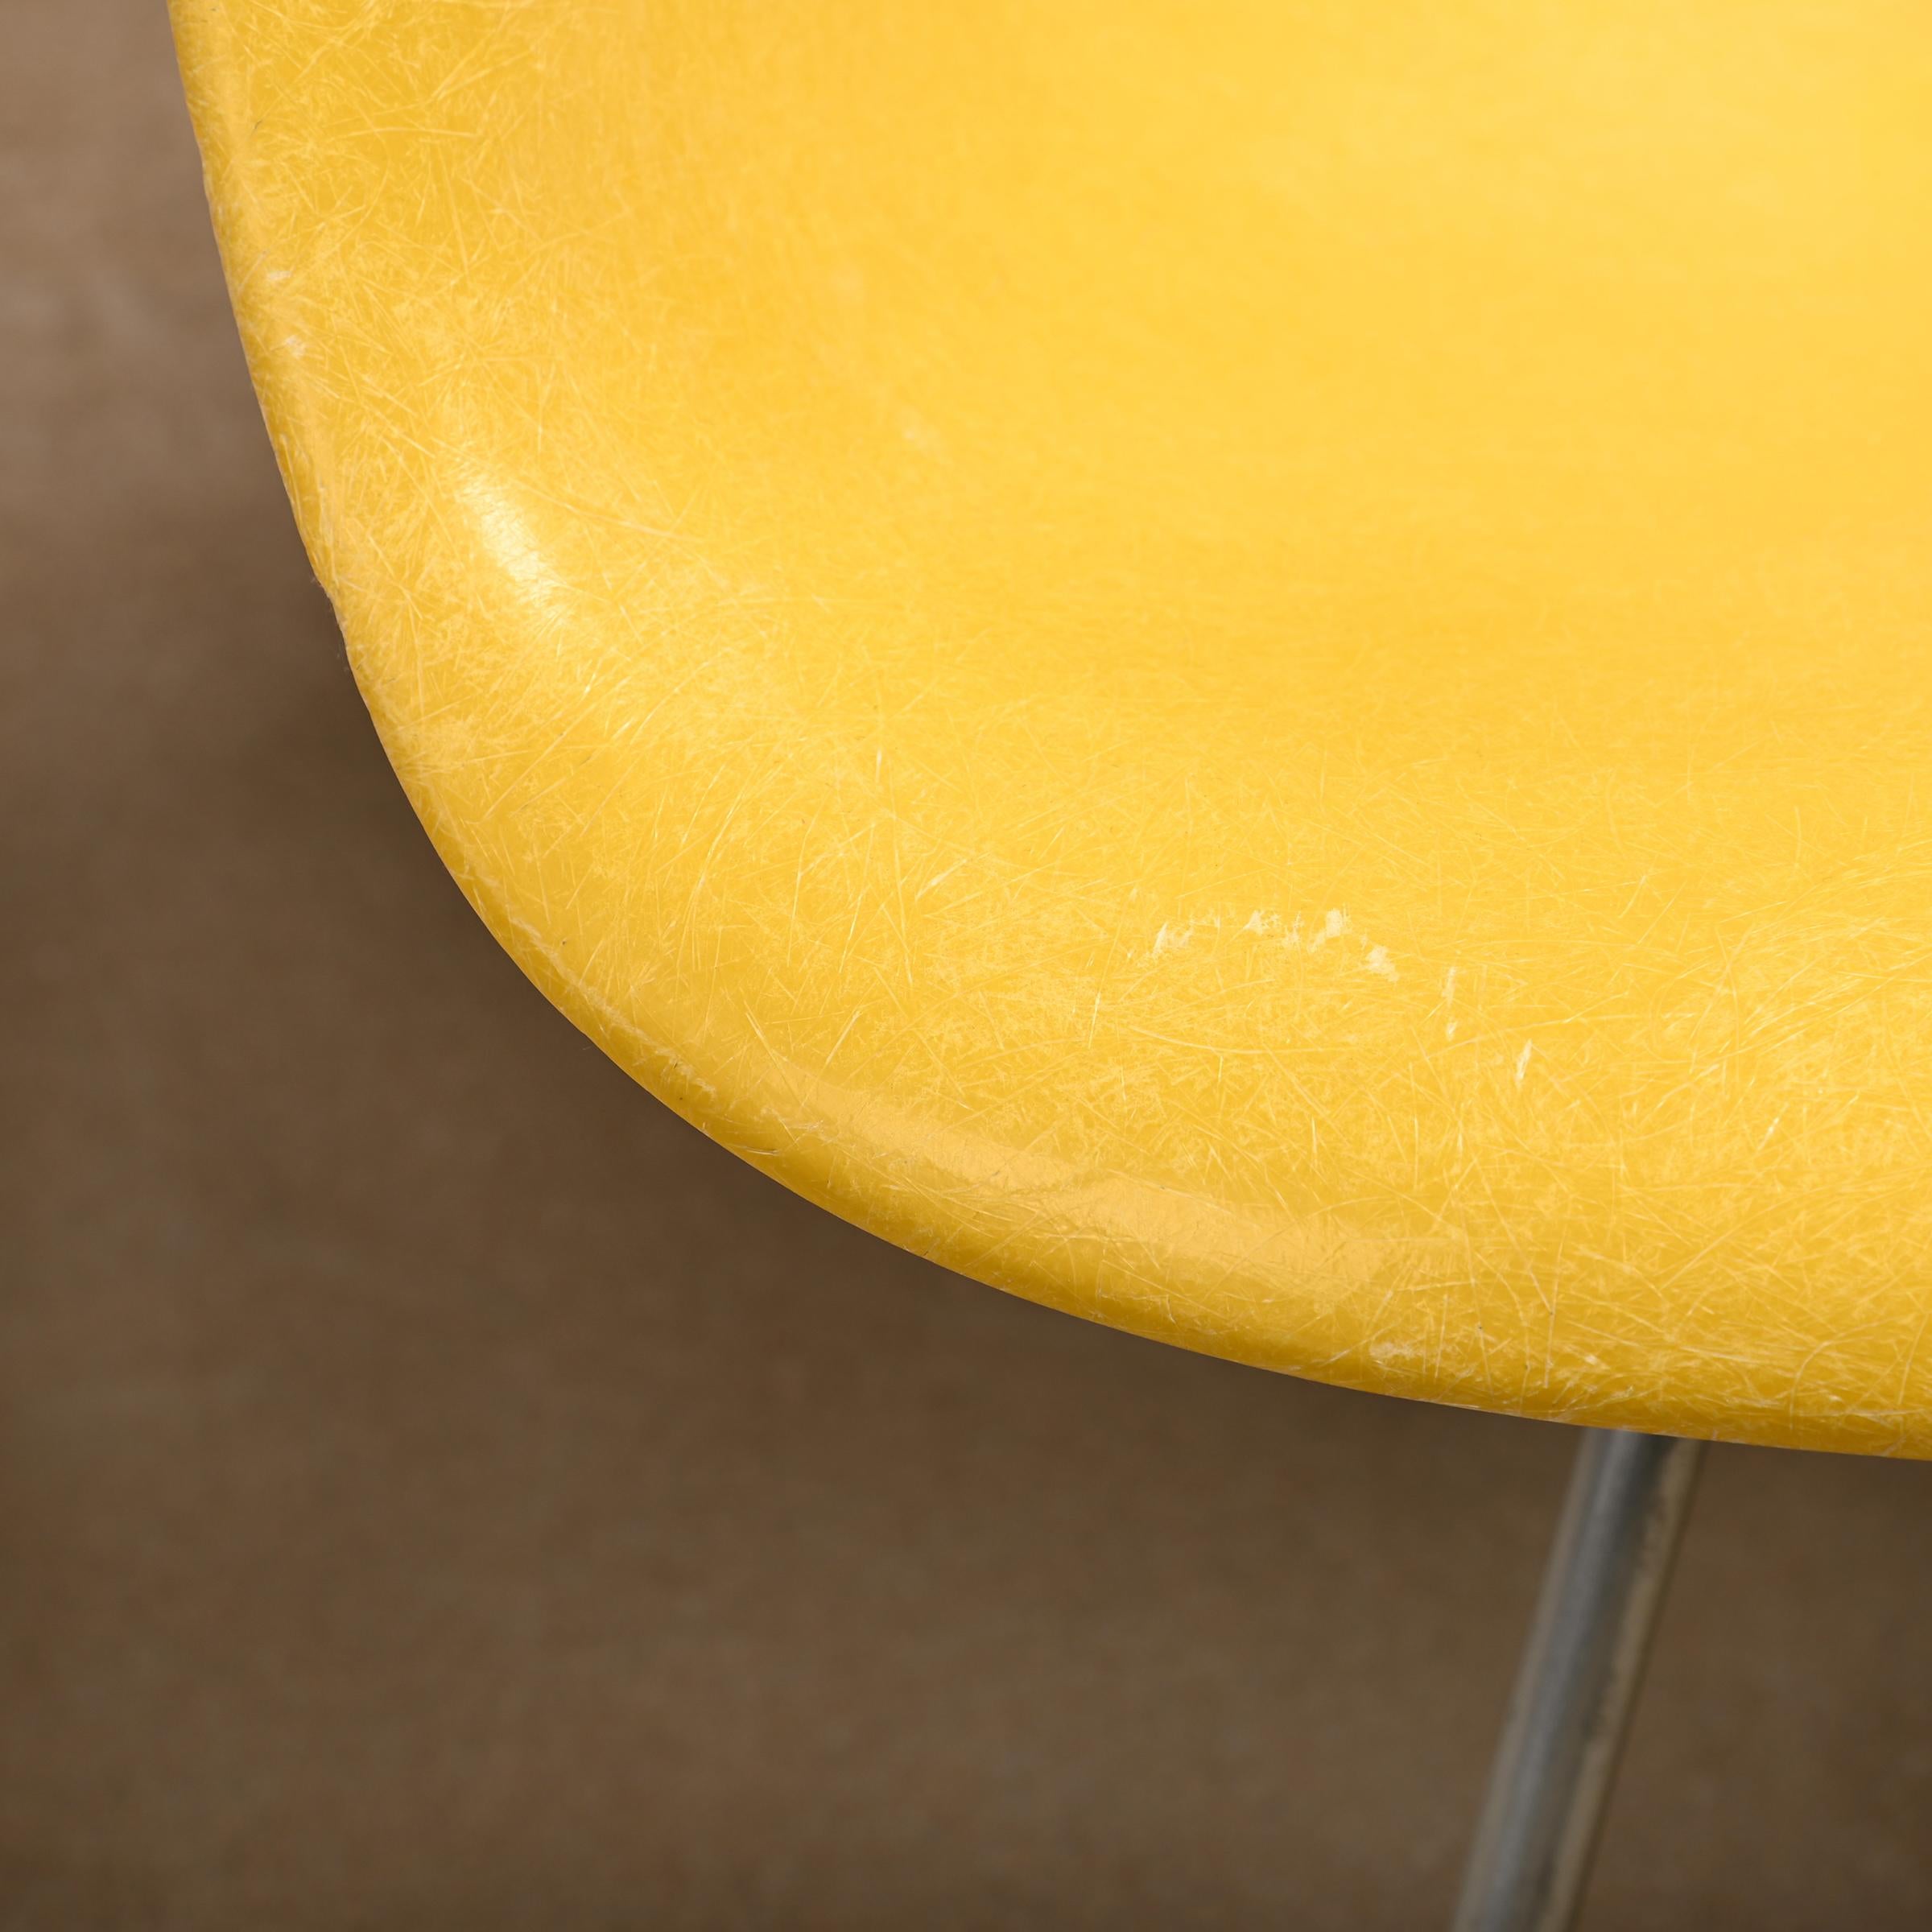 Steel Charles & Ray Eames Max Armchair in Canary Yellow Fiberglass for Herman Miller